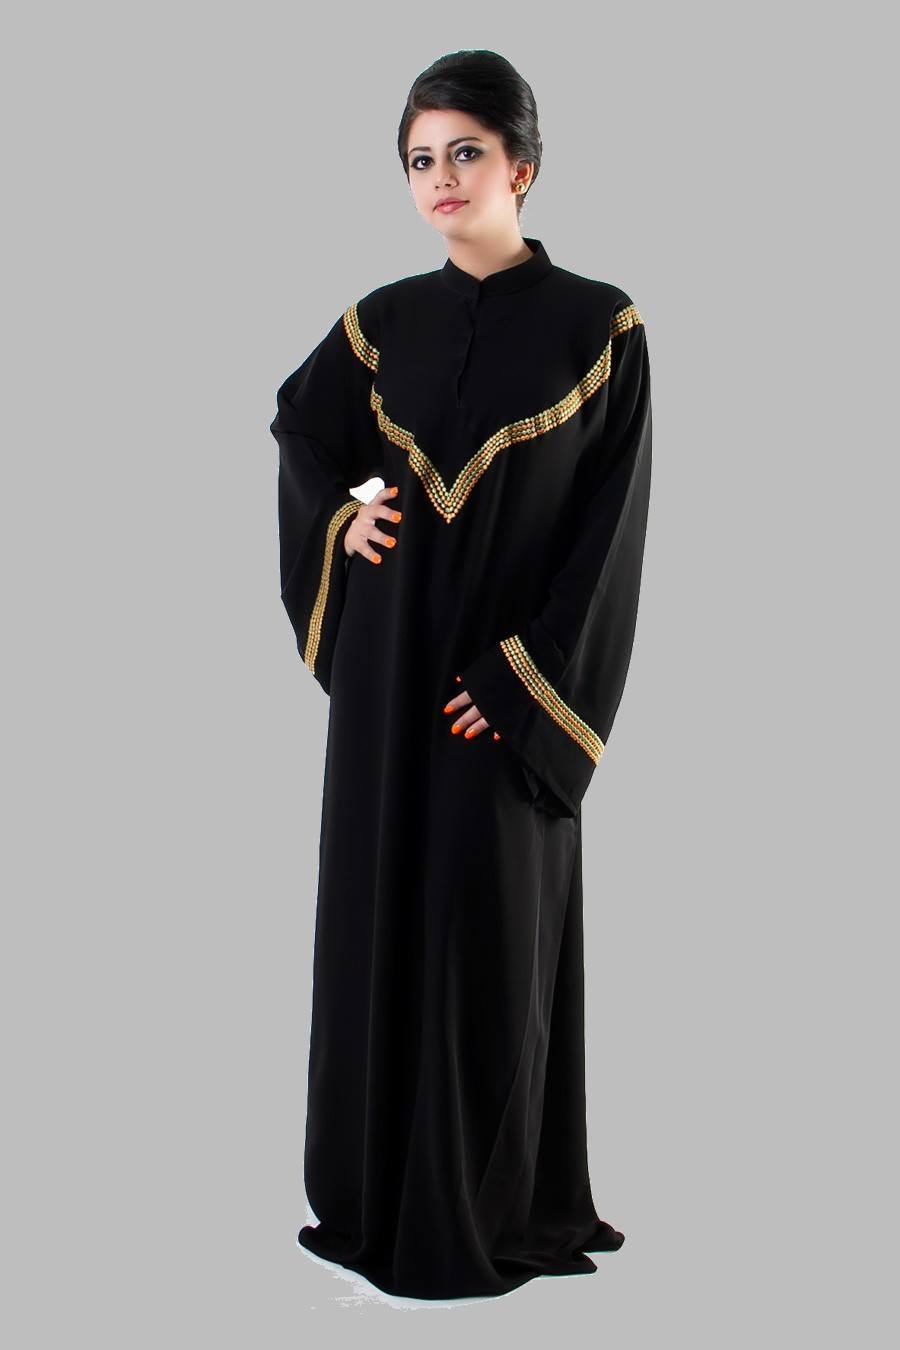 20 Latest Abaya Designs for a Modest & Beautiful Look